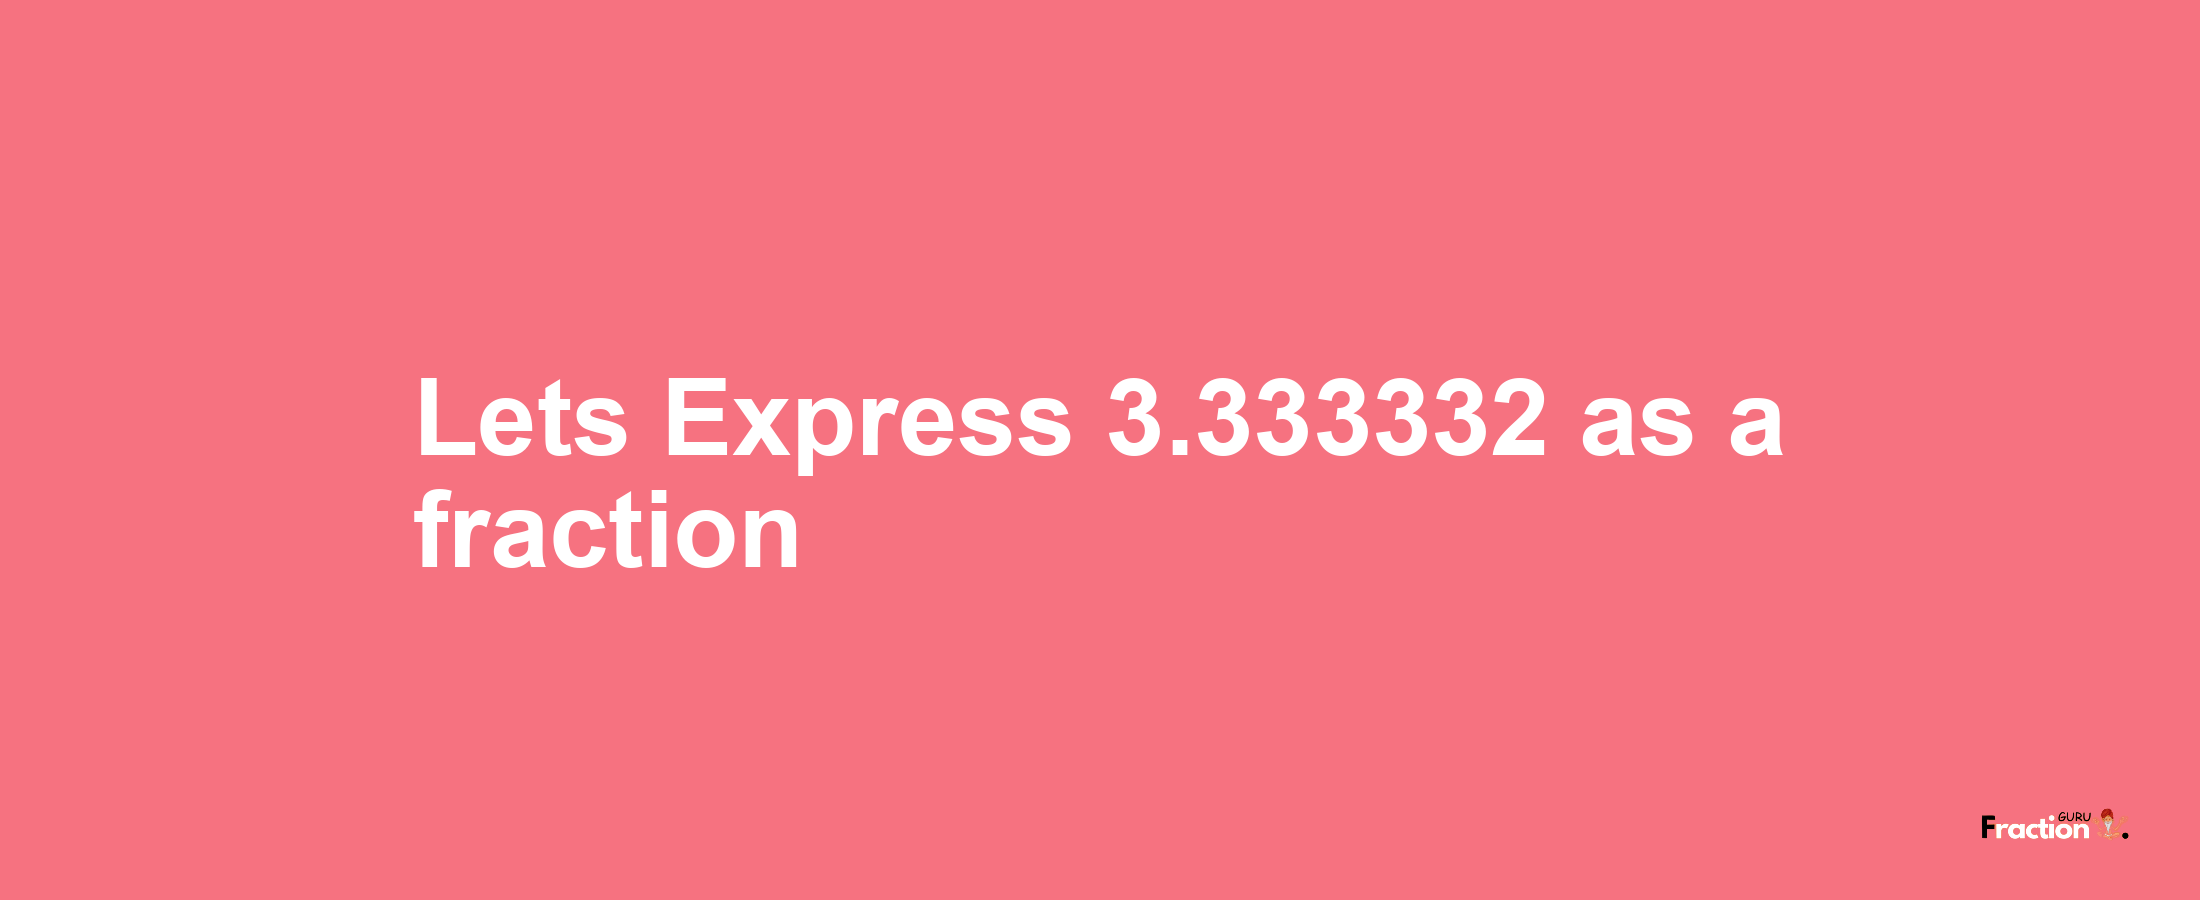 Lets Express 3.333332 as afraction